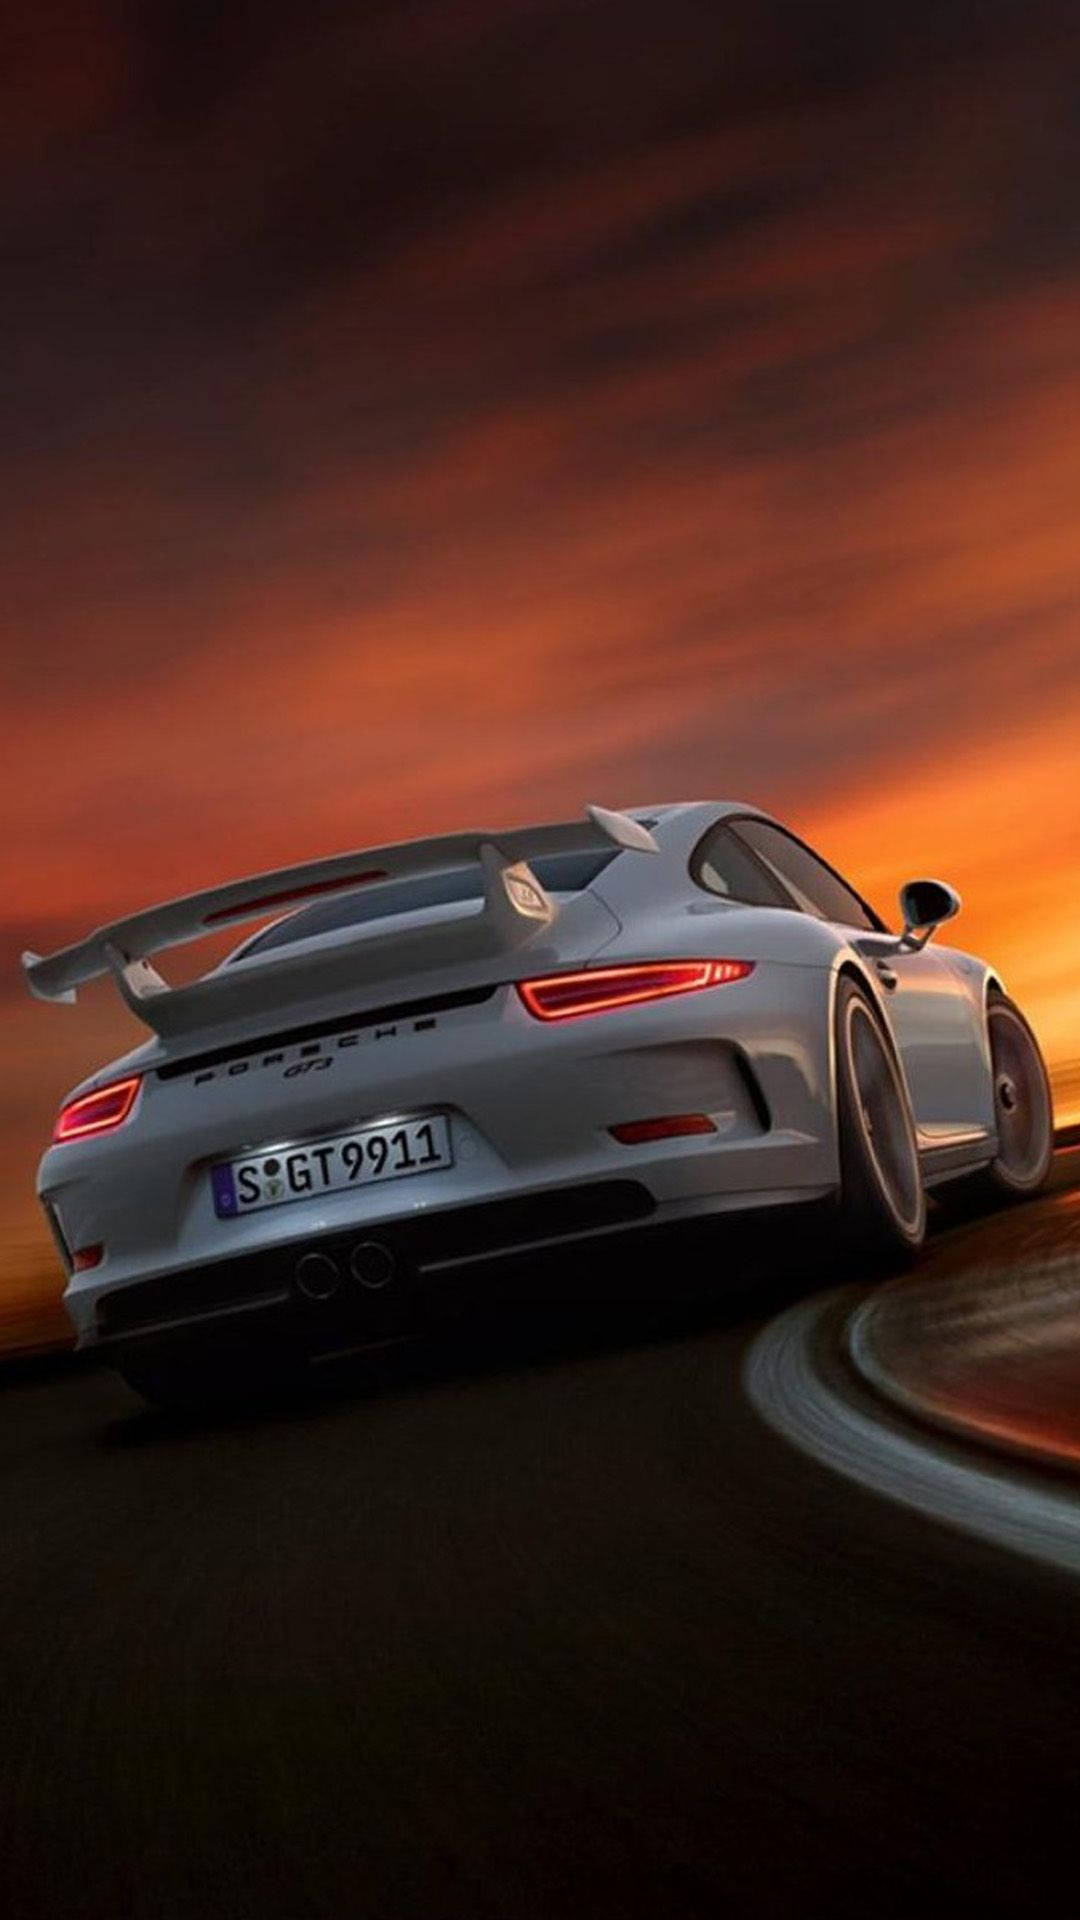 Sunset And White Porsche Gt3 Car Iphone